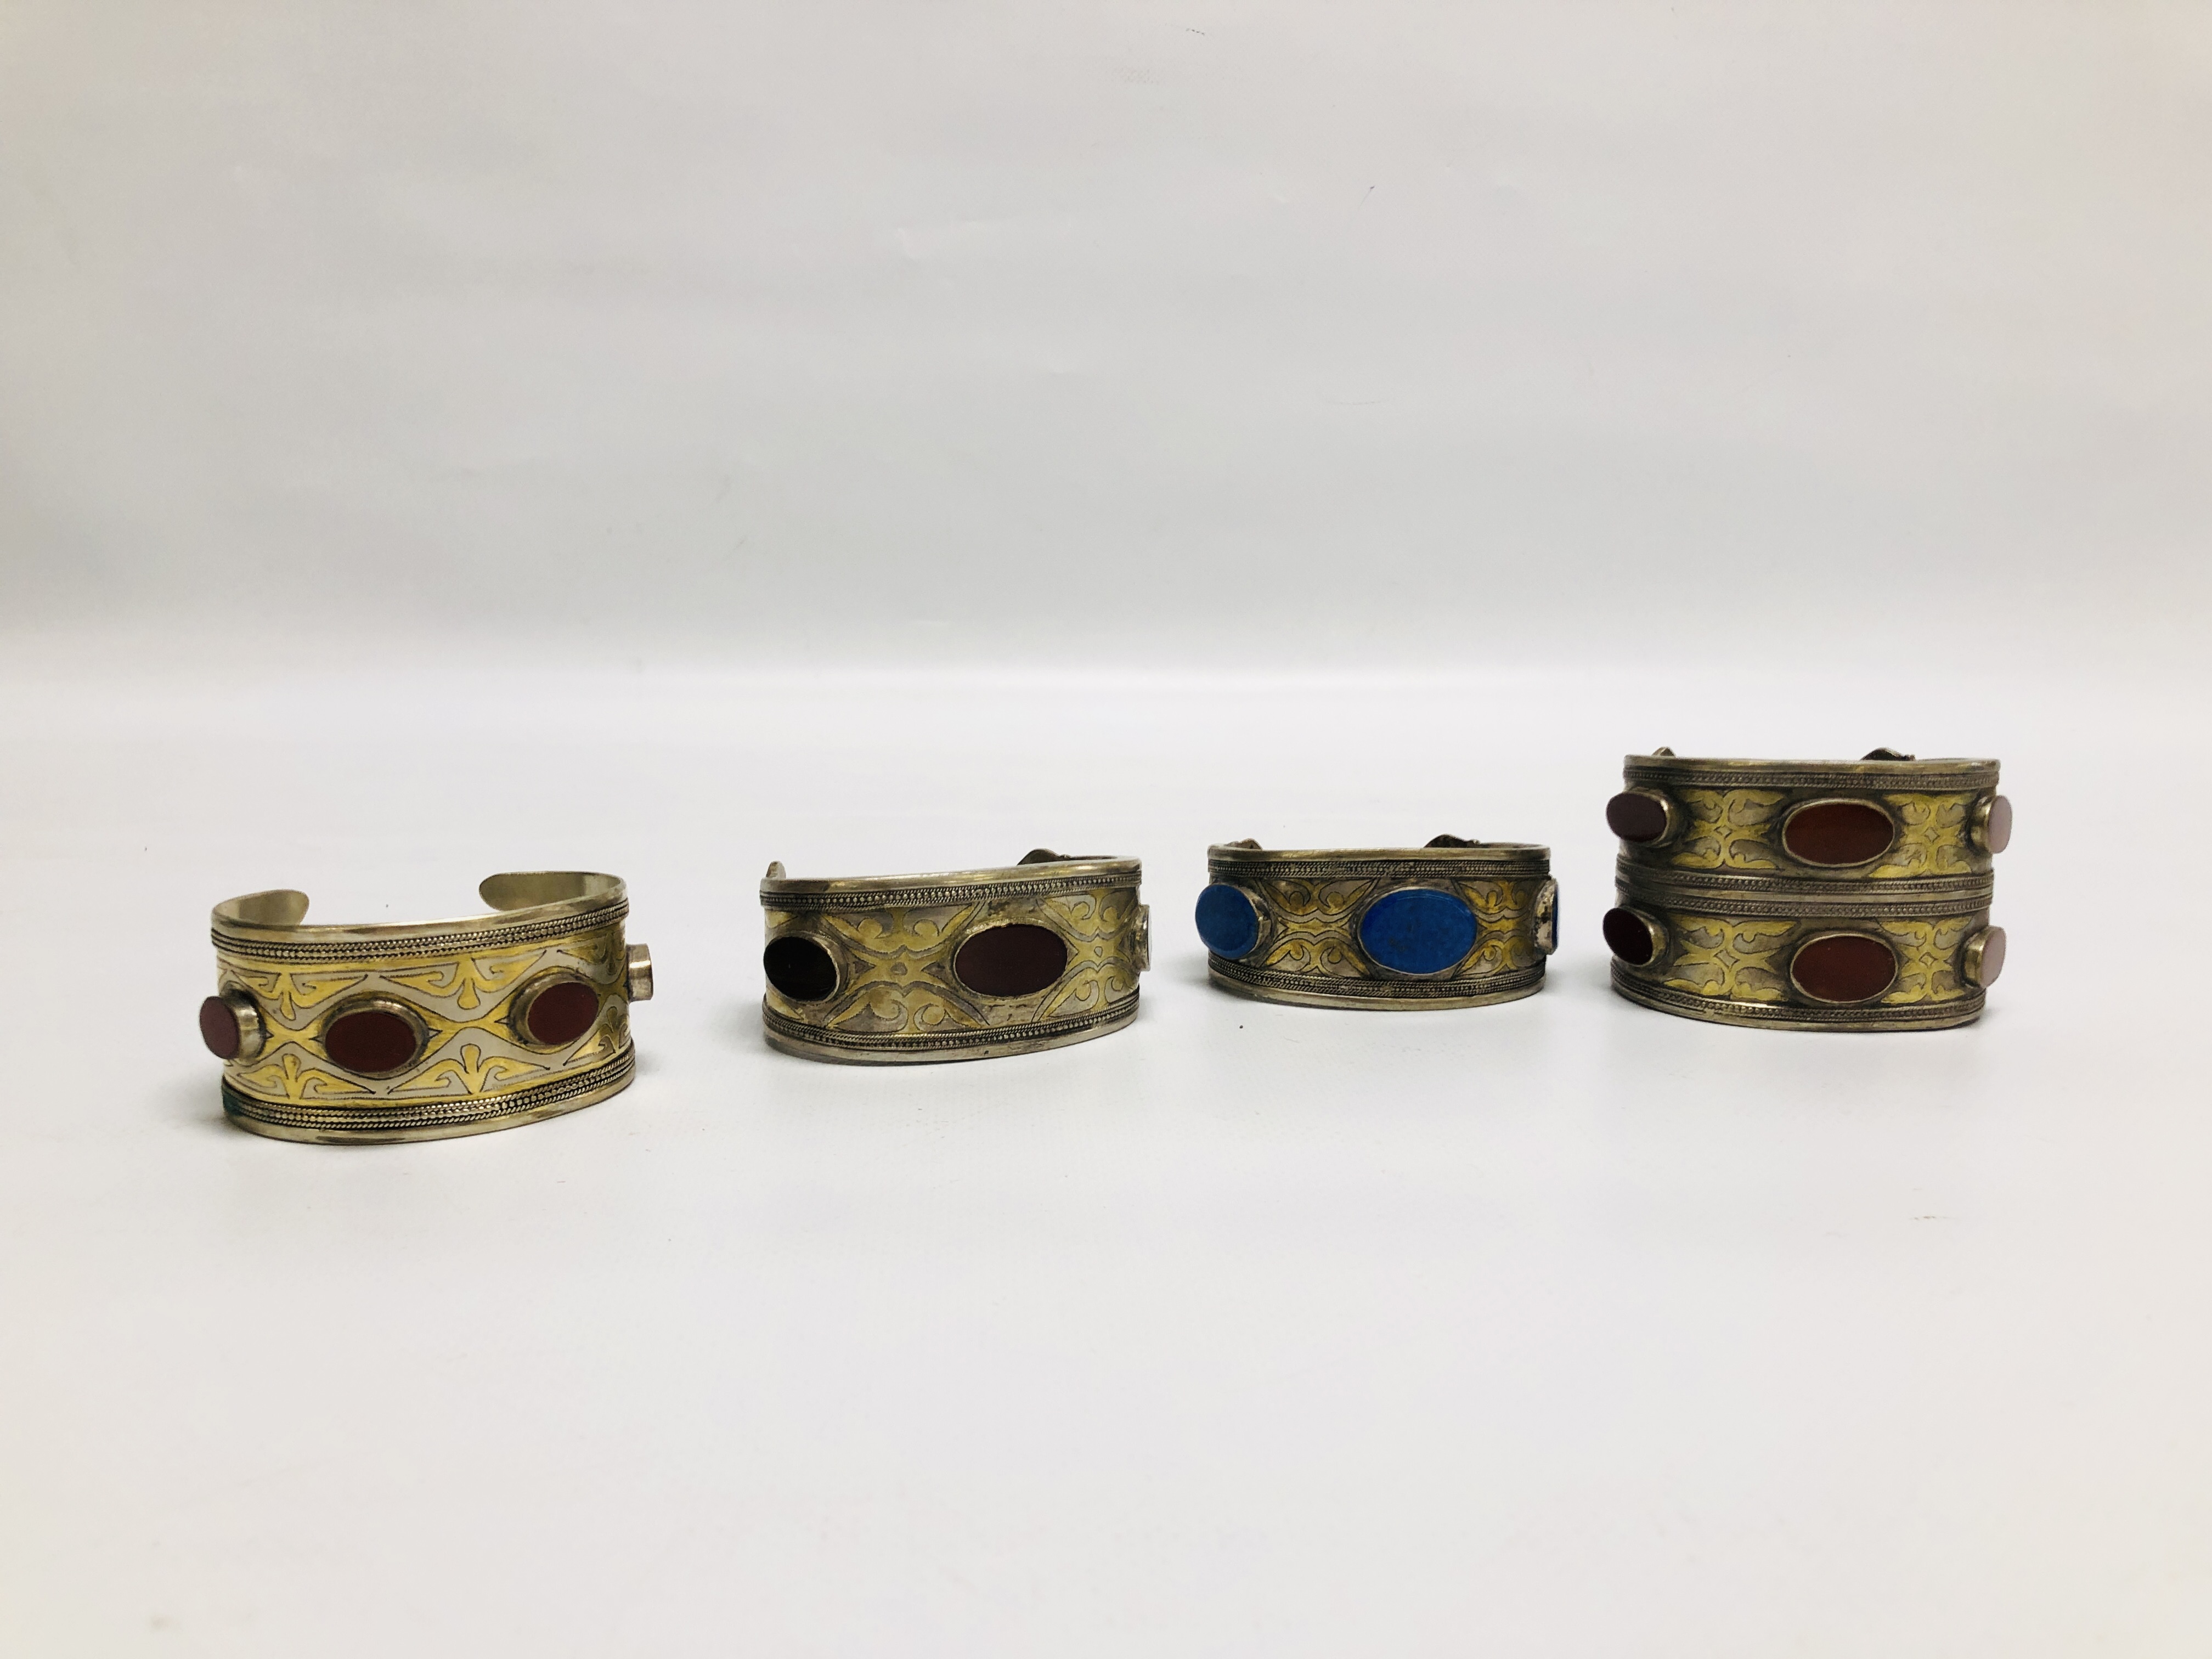 A GROUP OF 4 EASTERN STYLE WHITE METAL CUFF BRACELETS, INSET WITH OVAL STONES.